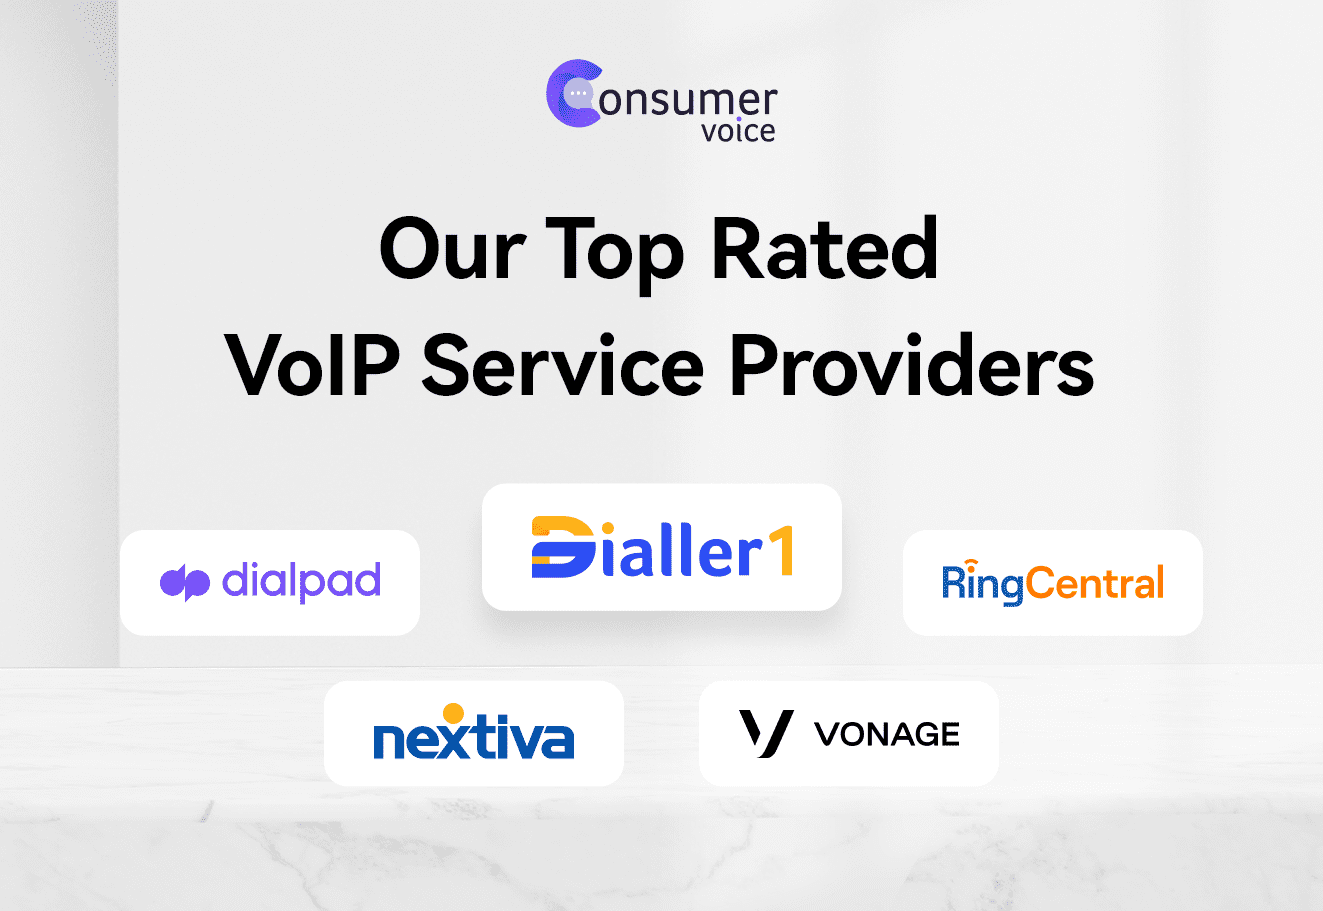 Our Top Rated VoIP Service Providers